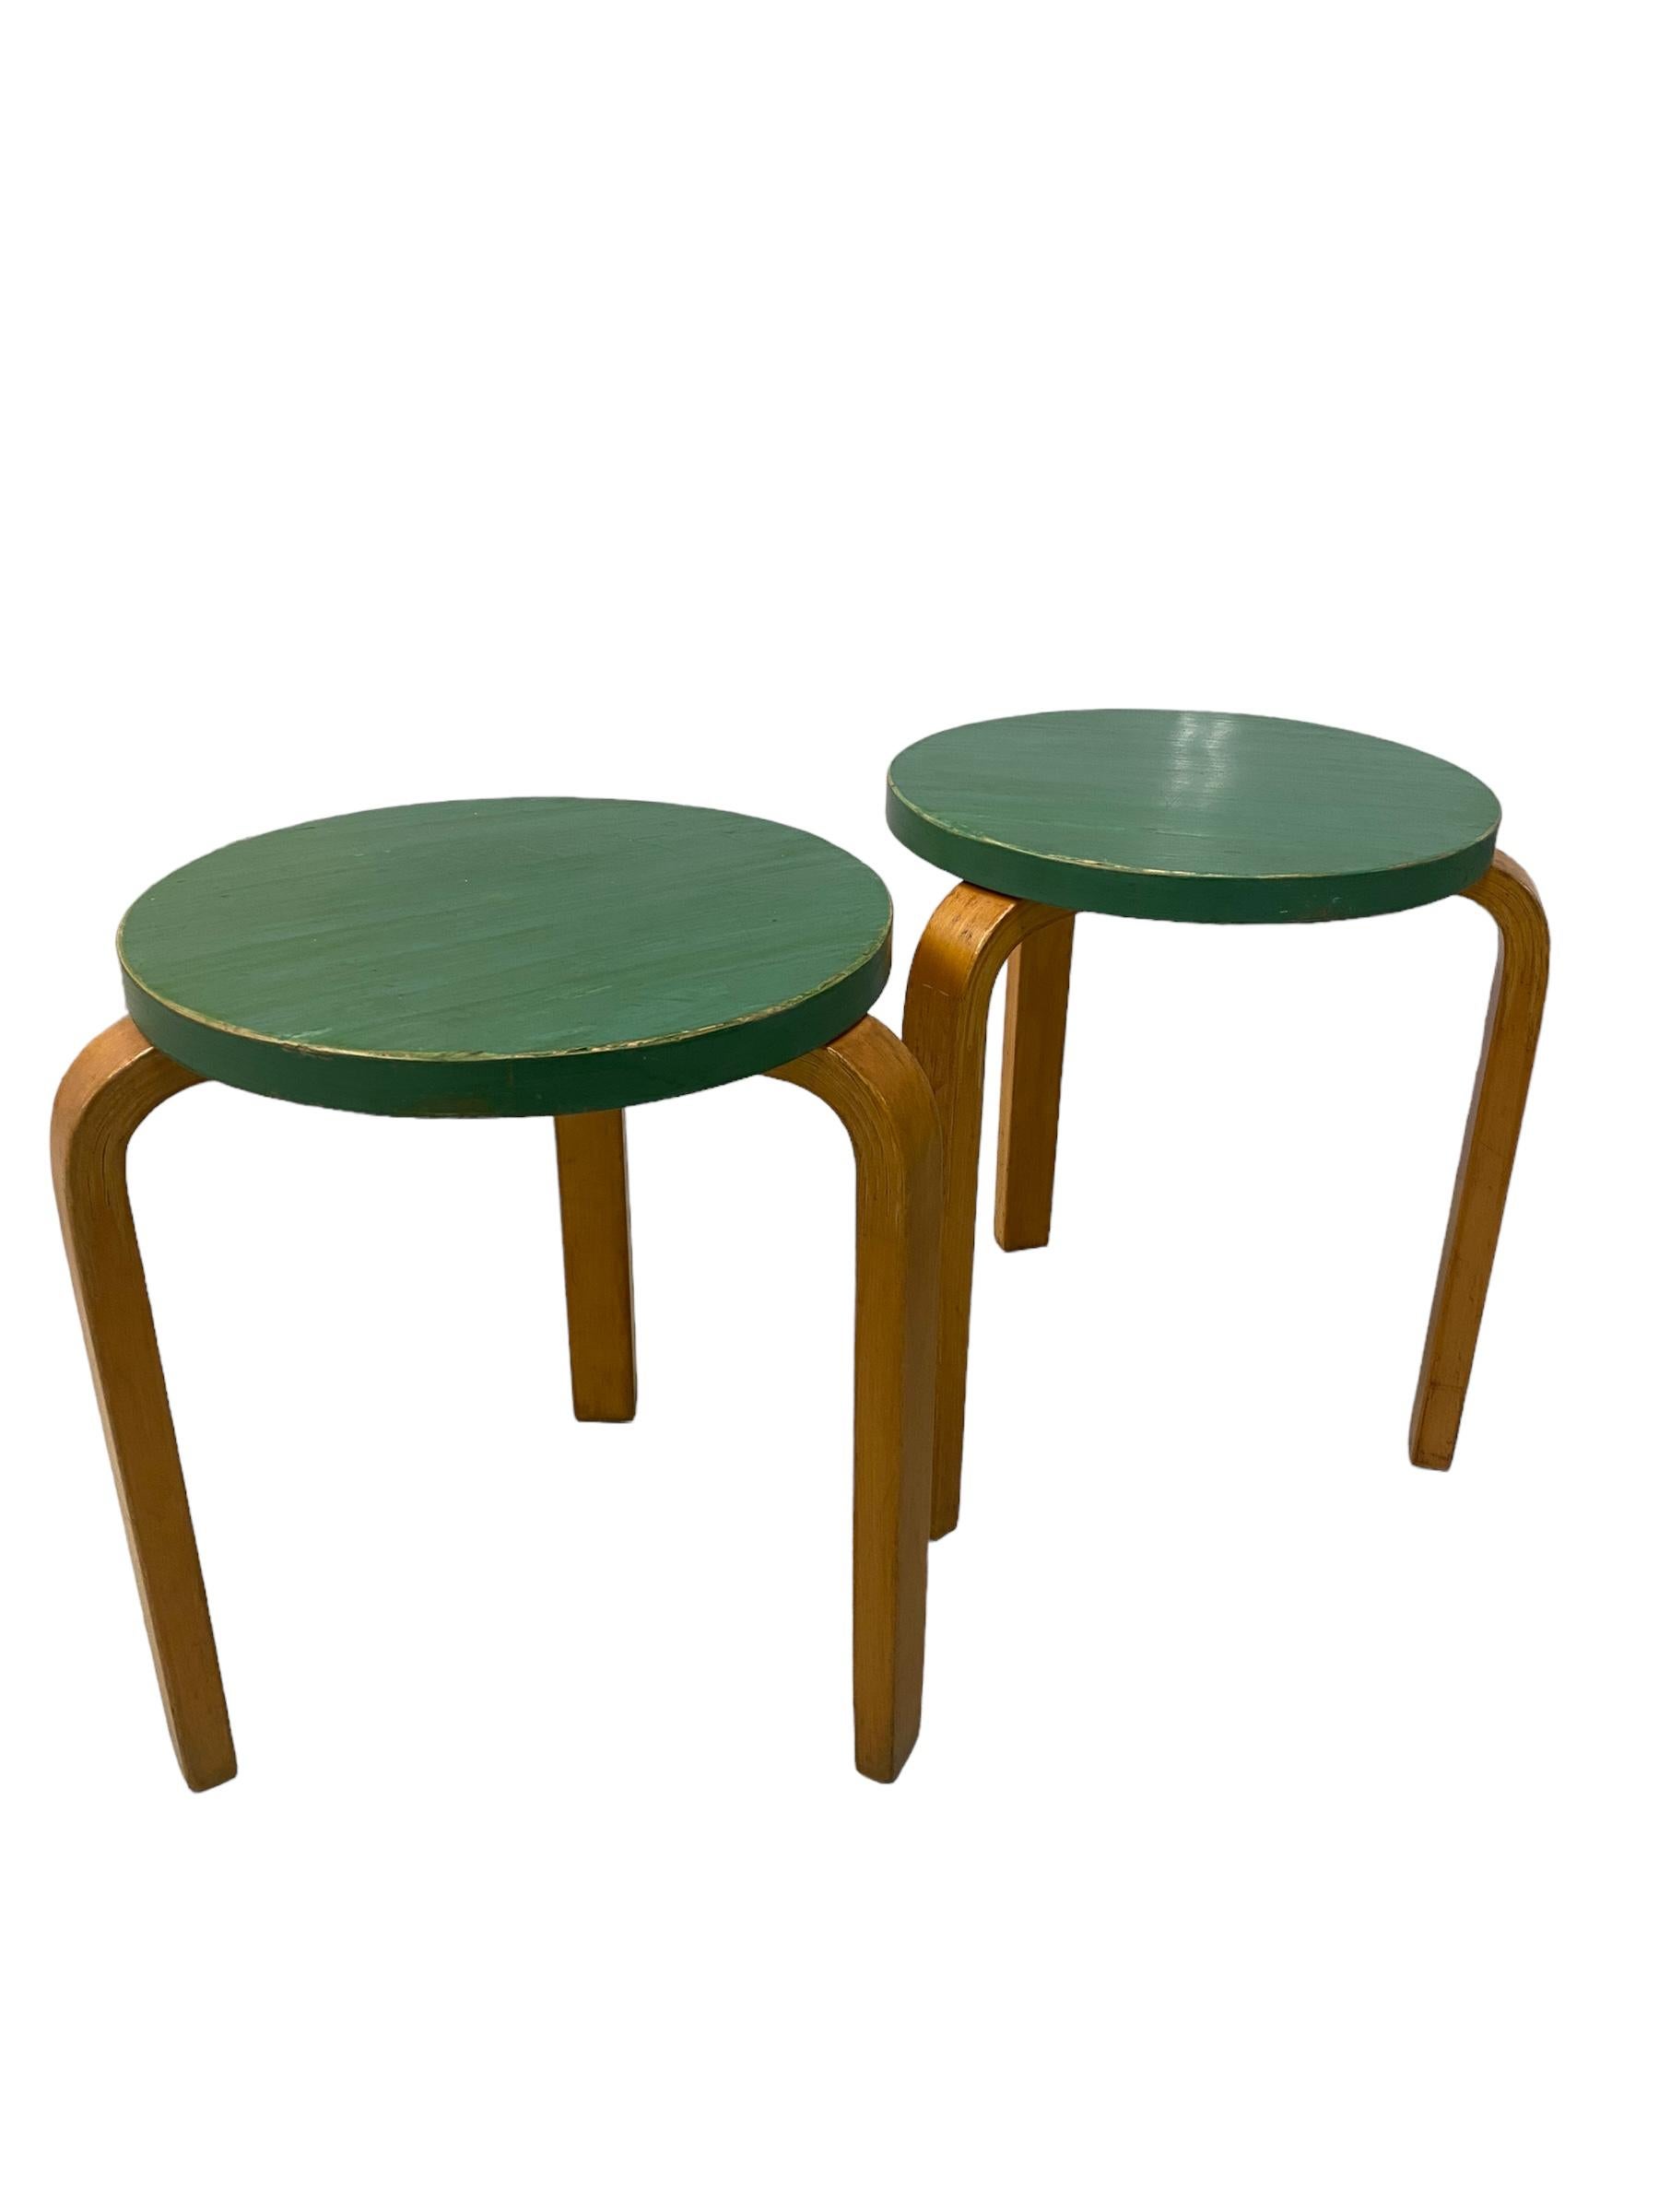 An iconic pair of green model 60 stools in birch. Designed by Alvar Aalto for Artek in the 1940s, this simple design has definitely stood the test of time, as it is still in production and is still one of the most popular among consumers. The model